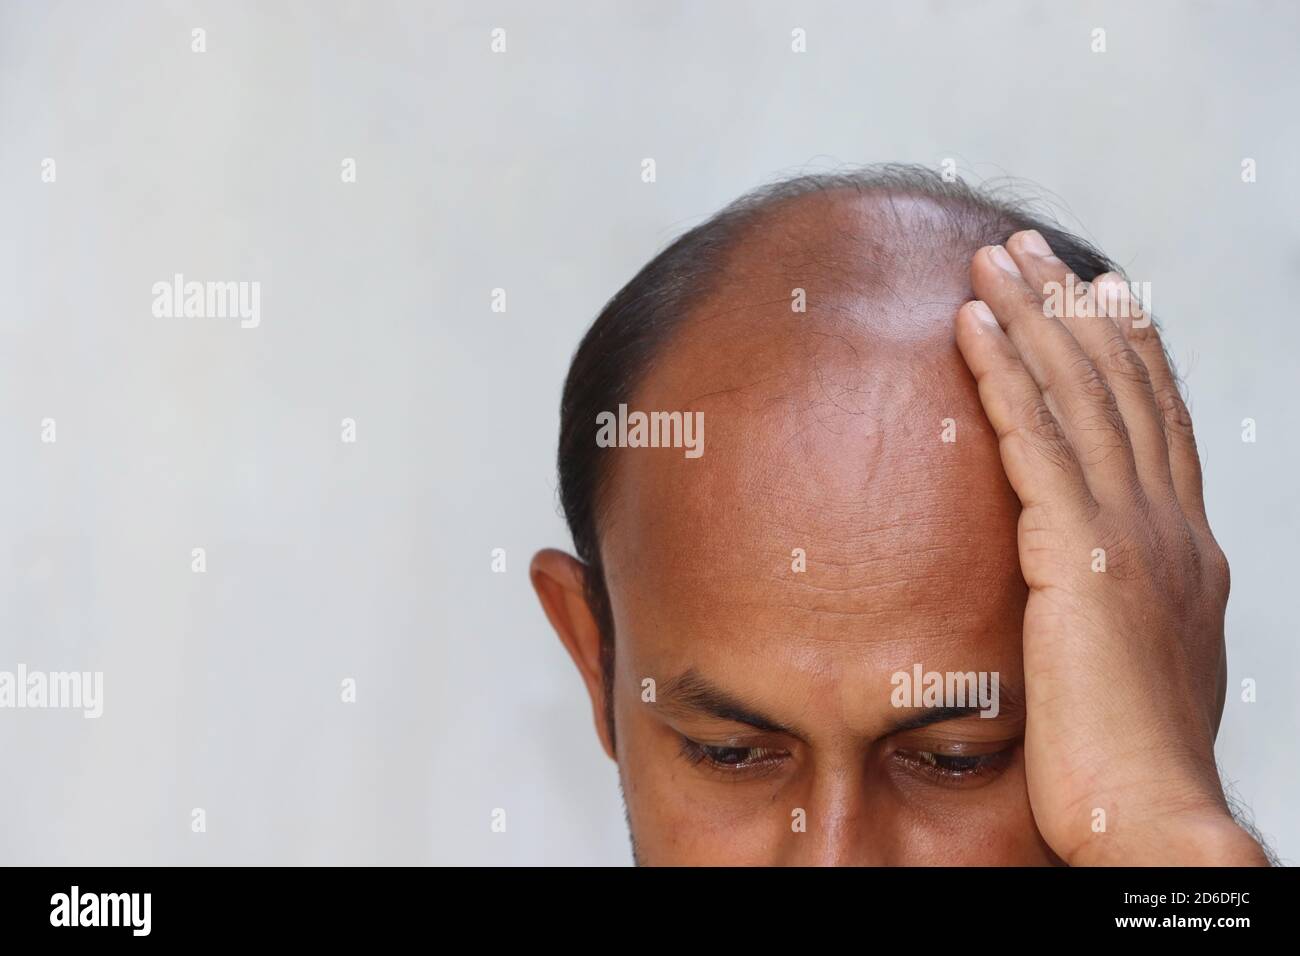 On head man without hair Man Without